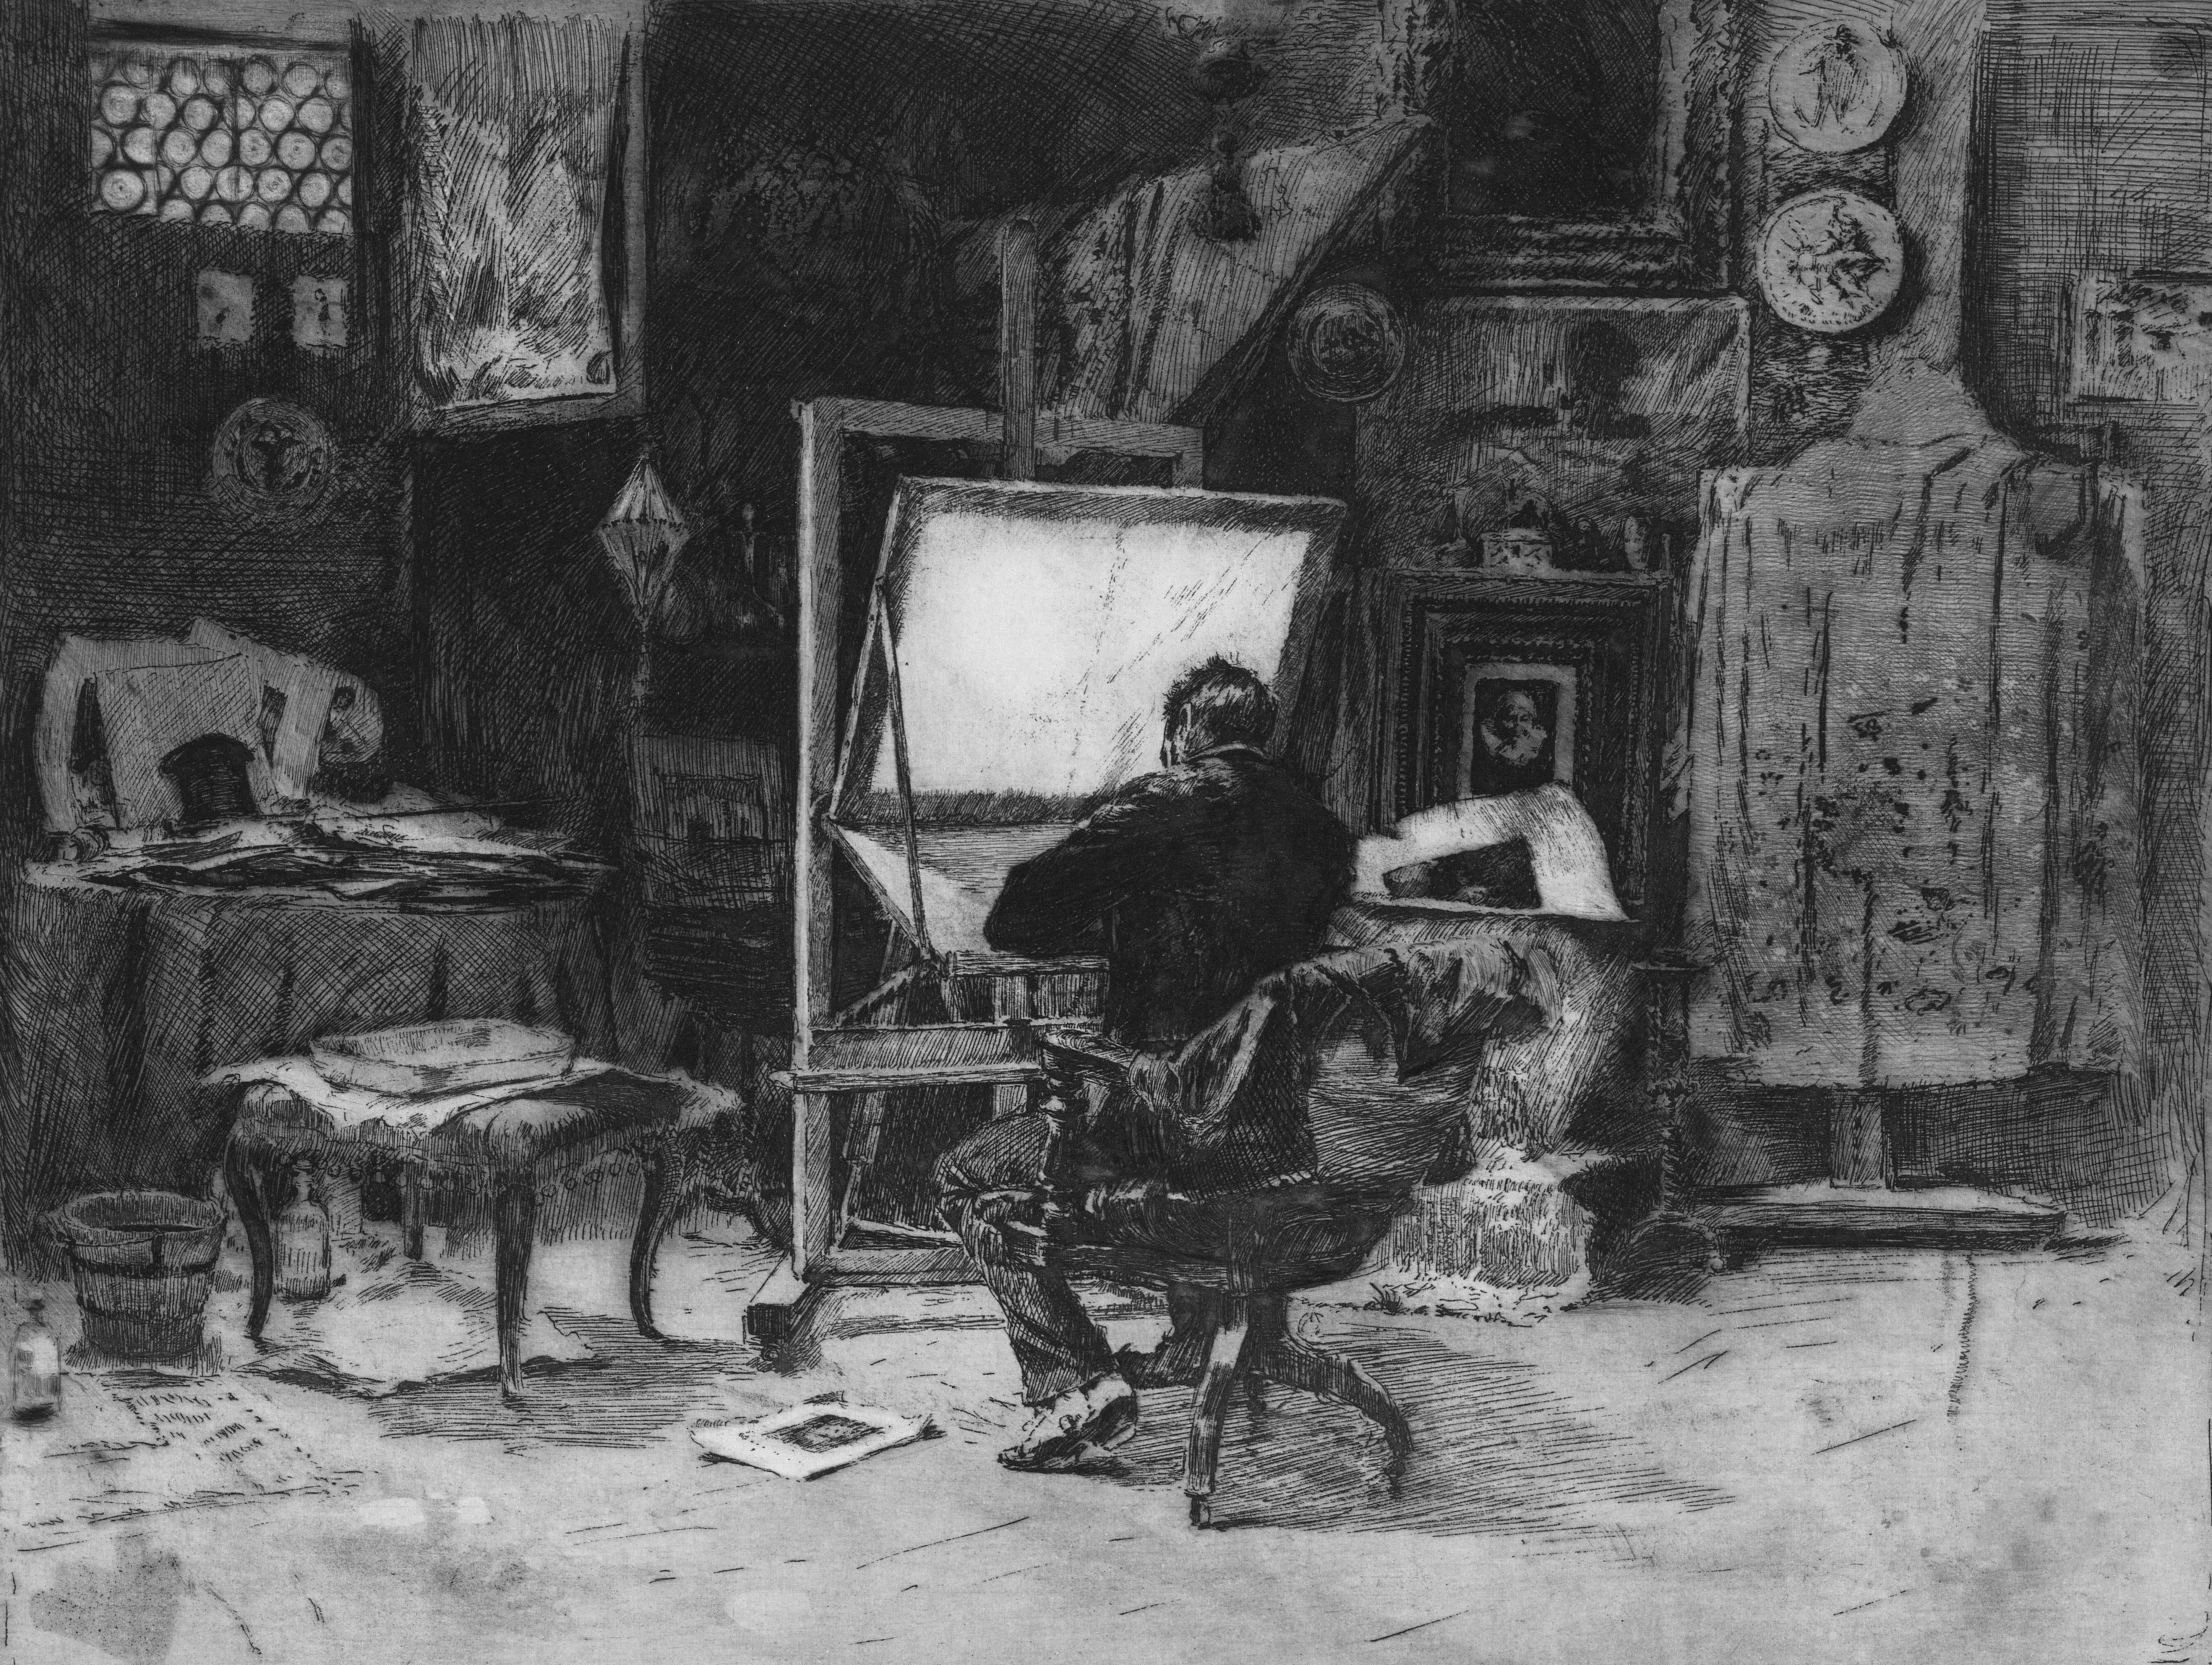 a drawing of people sitting in front of an old television